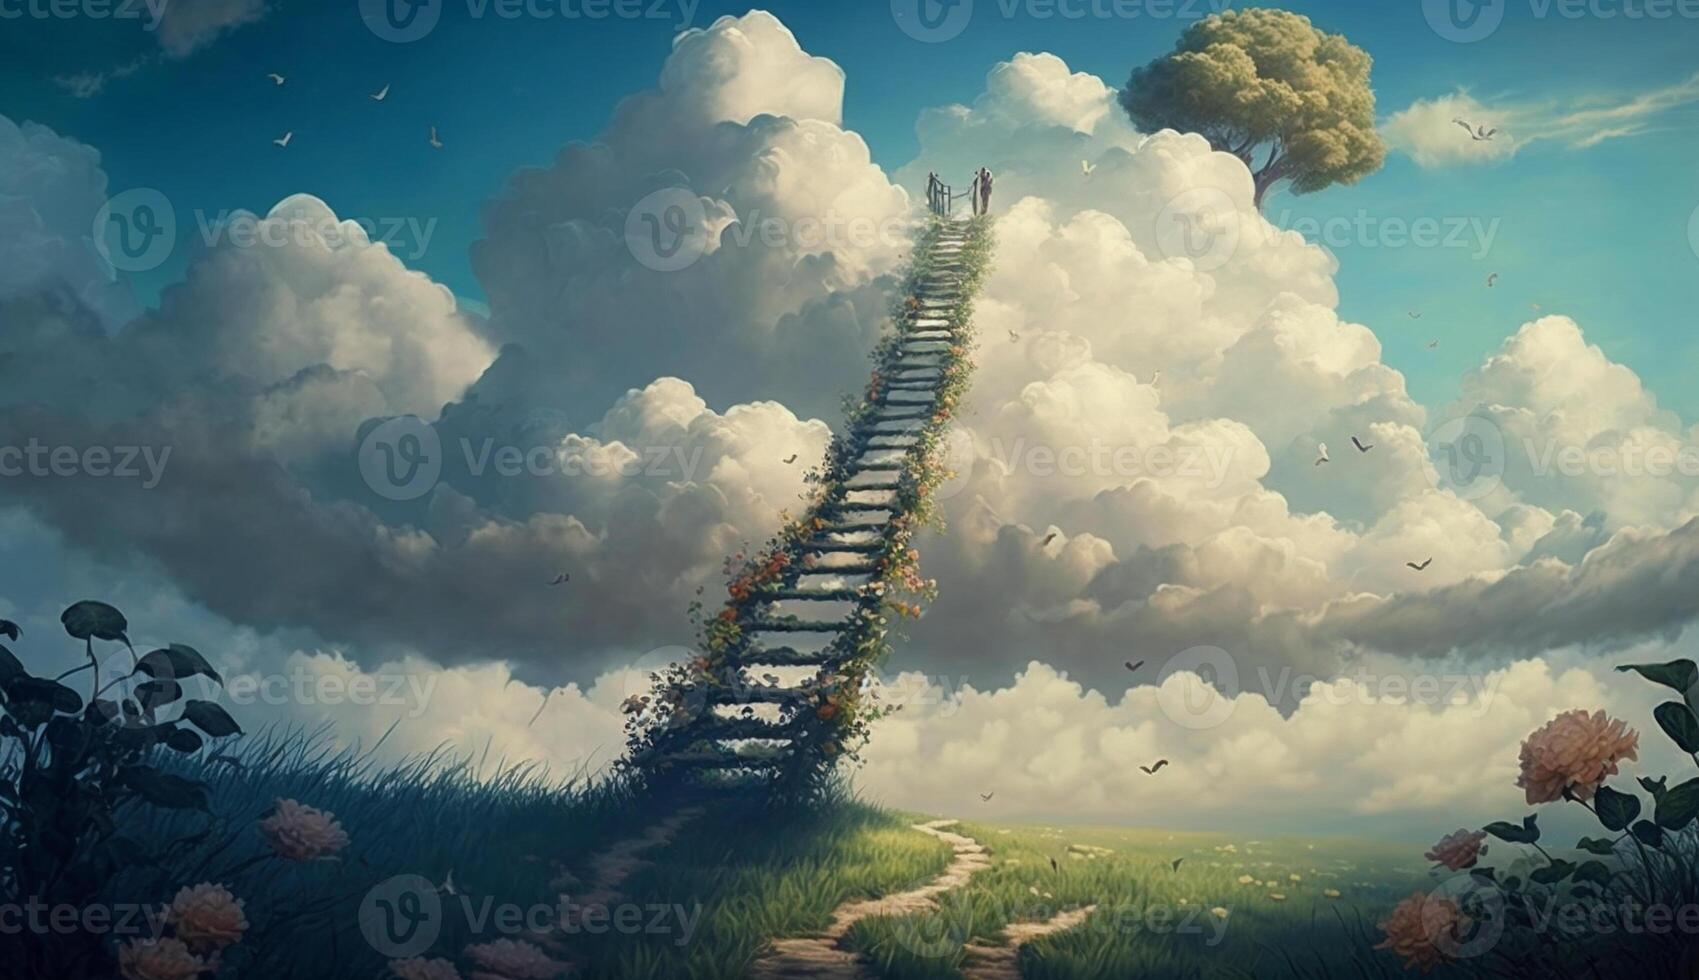 Stairway Leading Up To Heavenly Sky, created using Technology photo